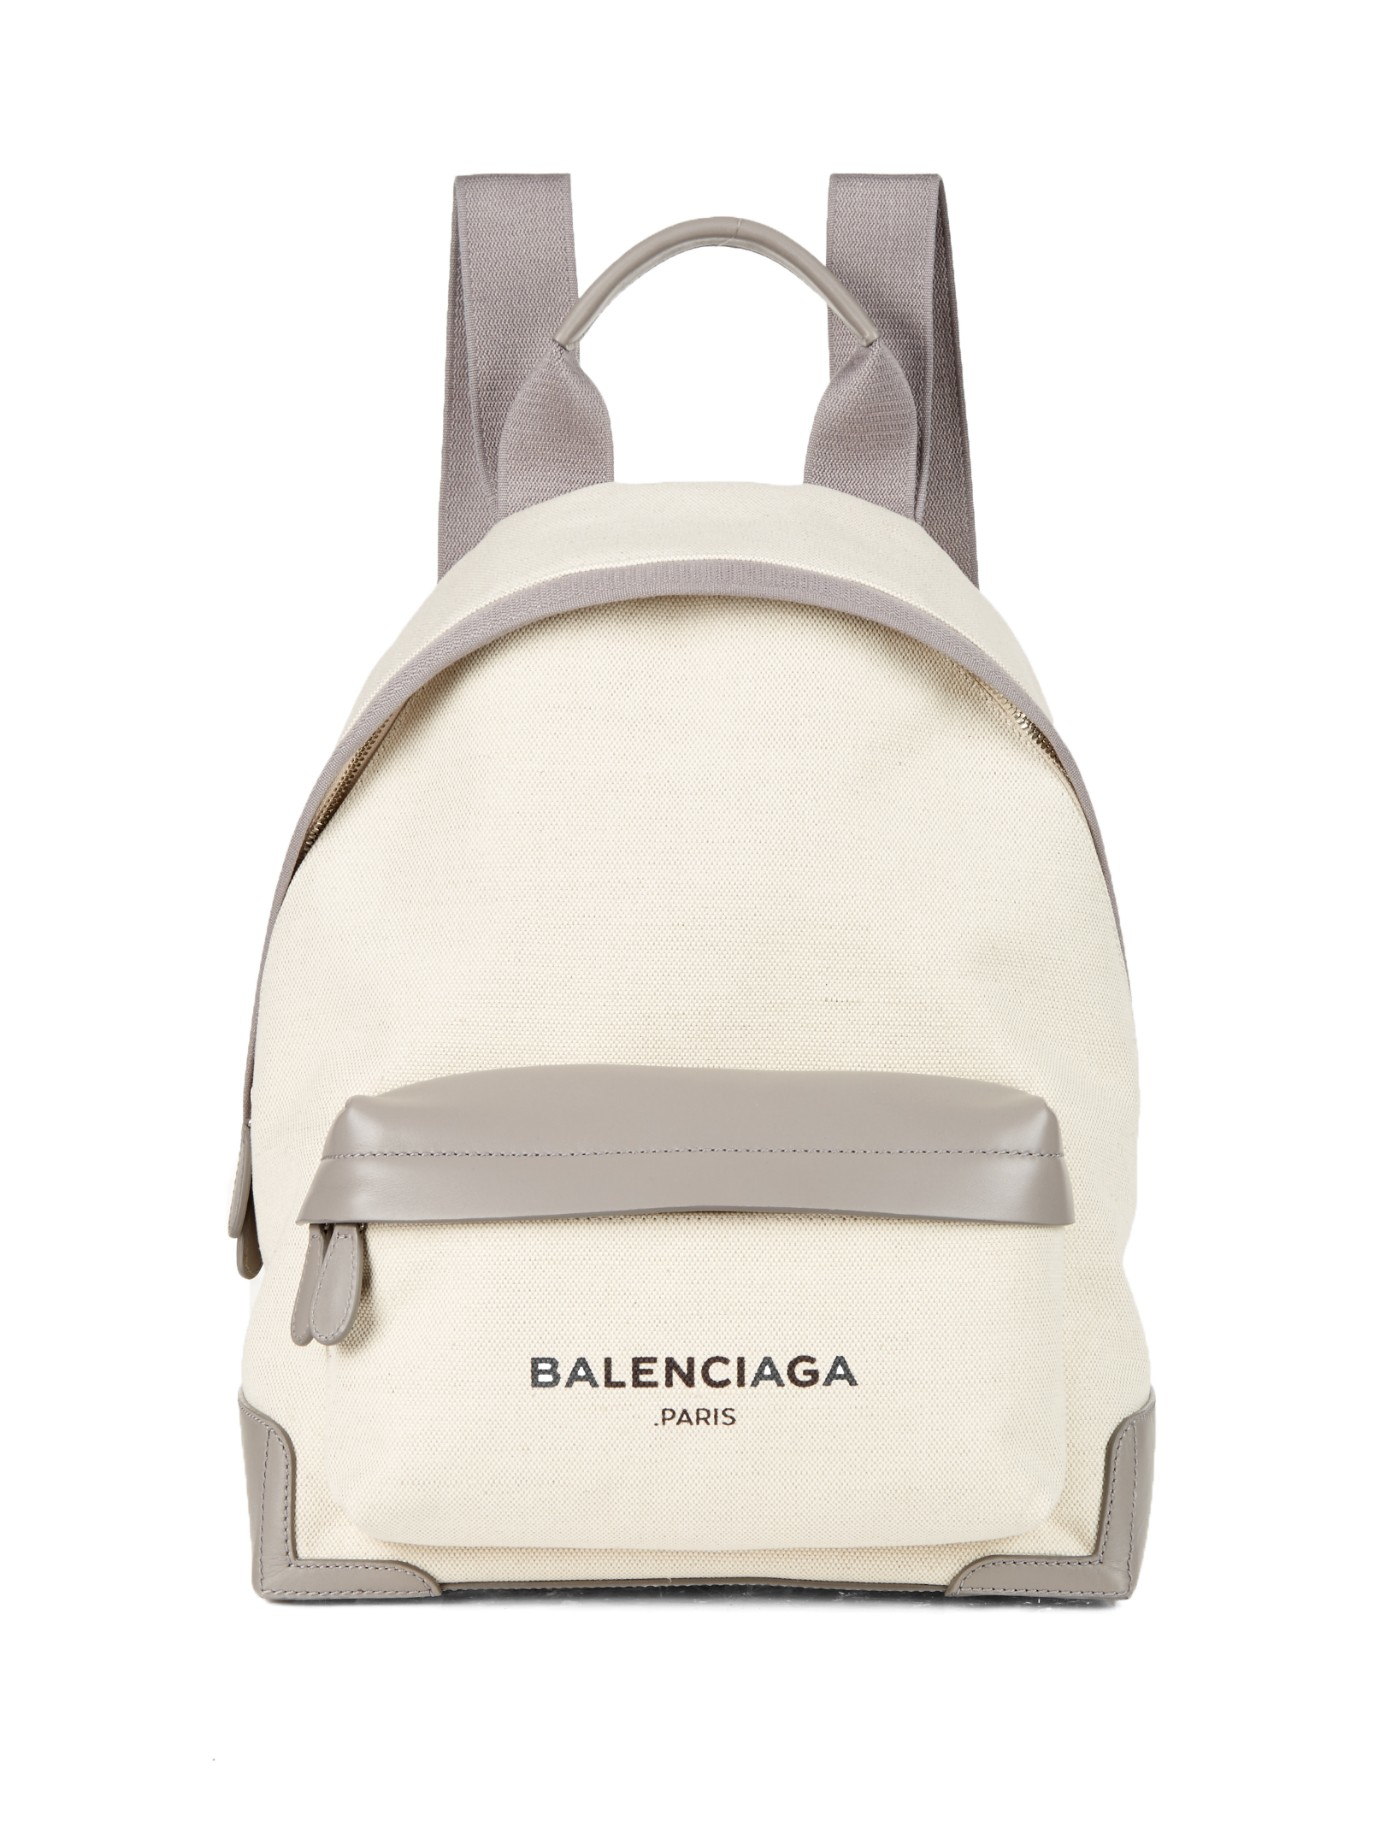 Balenciaga Navy Canvas And Leather Backpack in Gray | Lyst